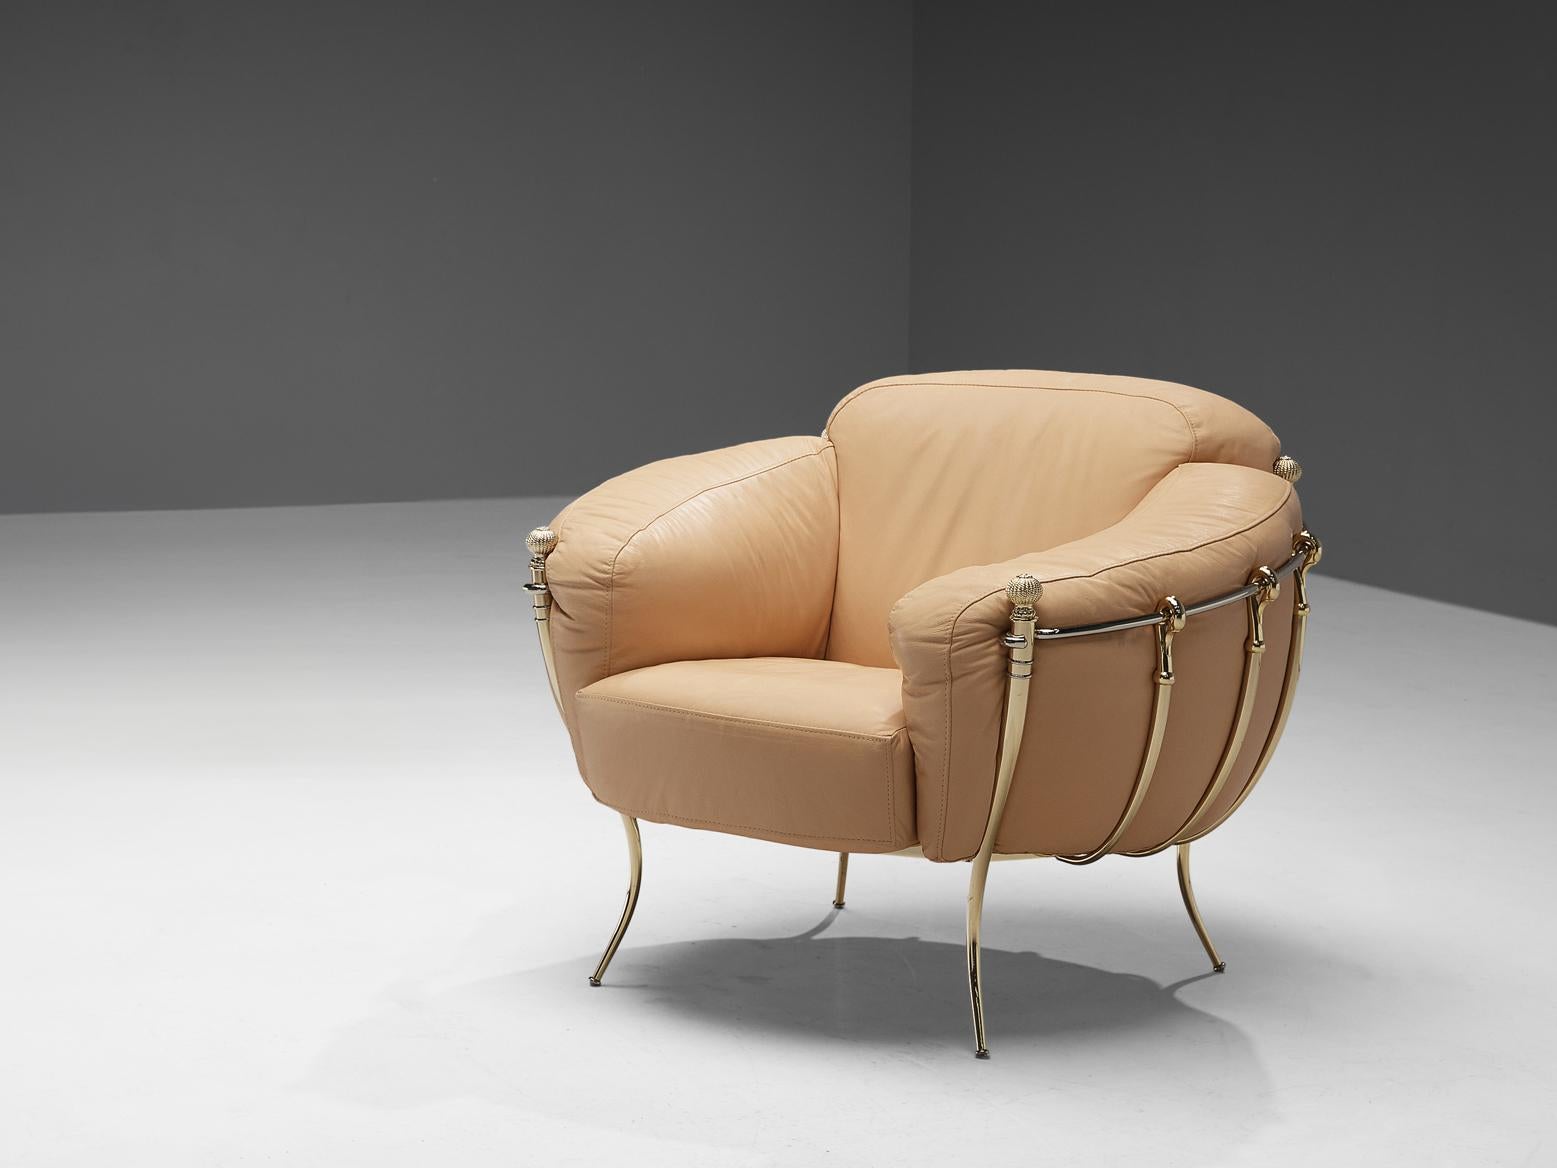 Spanish Lounge Chair in Peach Leather and Brass